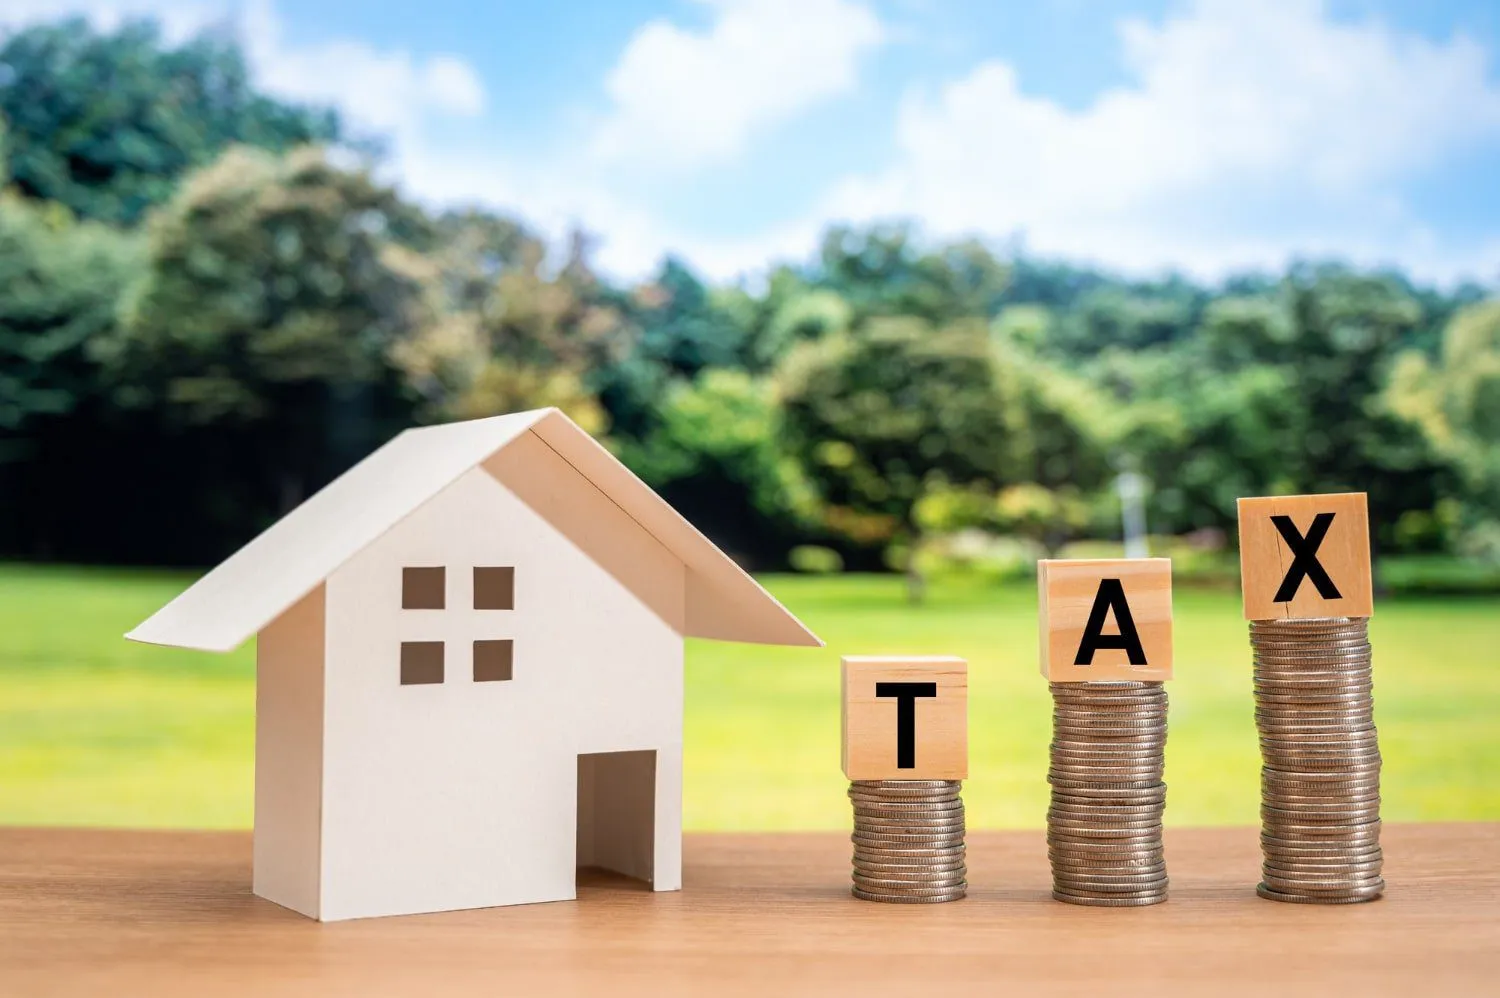 A Complete Property Tax Guide for Landlords and Property Investors